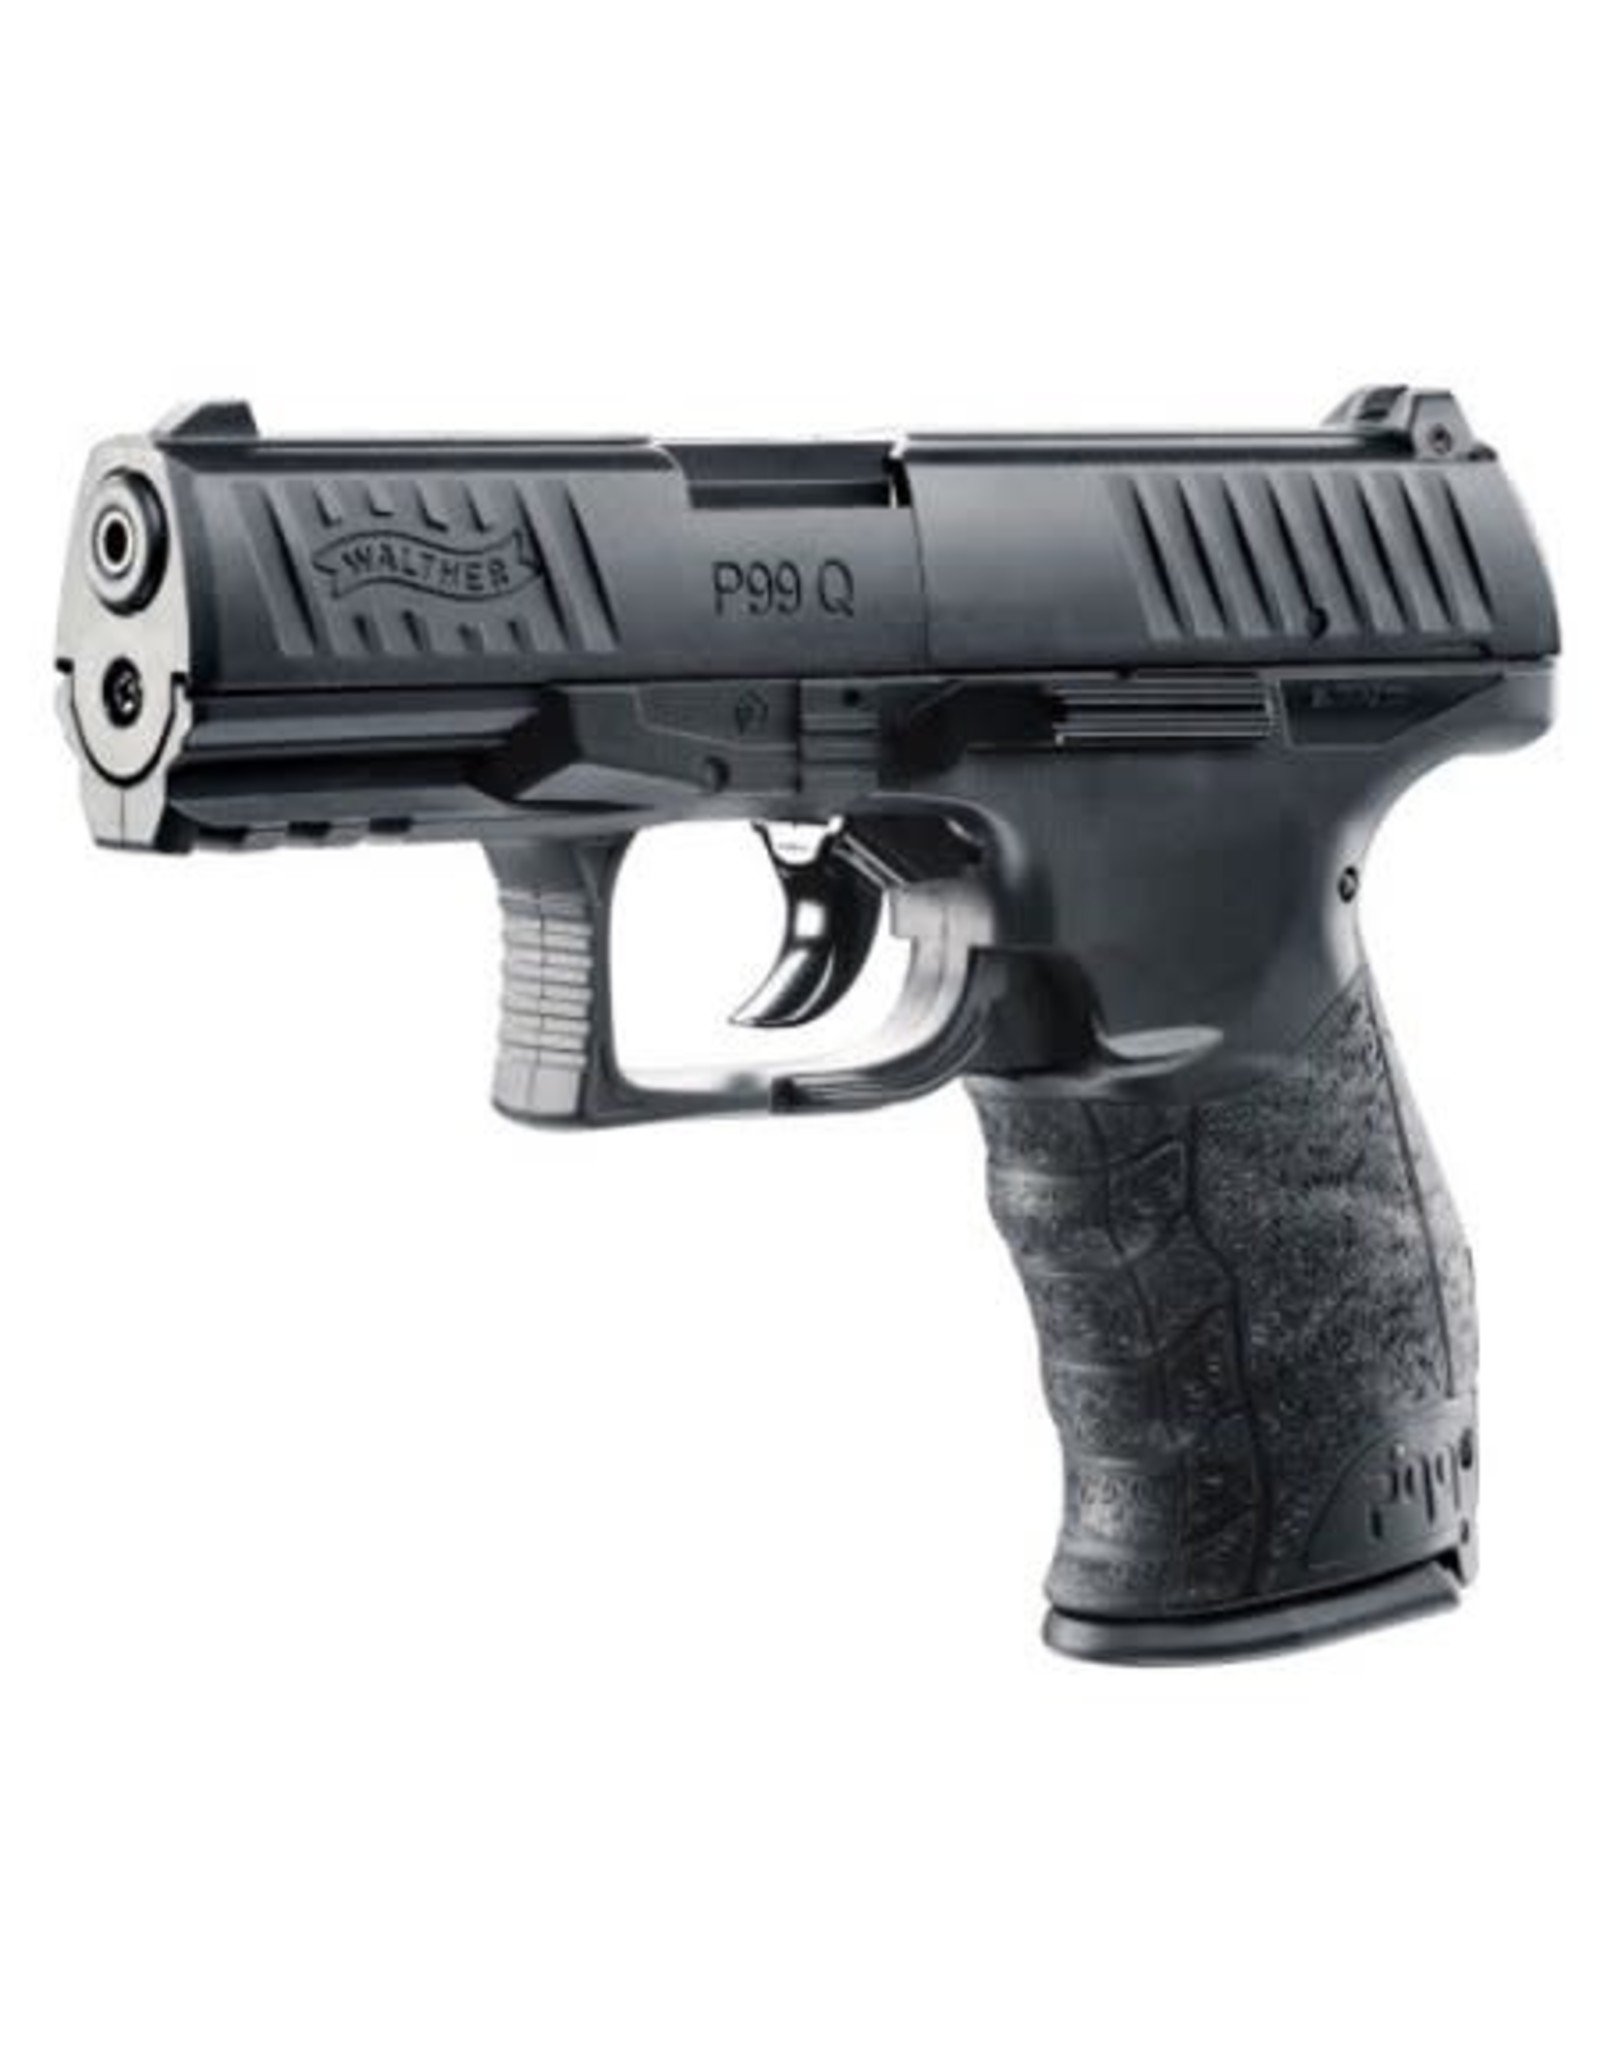 Walther Walther PPQ .177 Pellet or BB C02 Pistol - 360 FPS